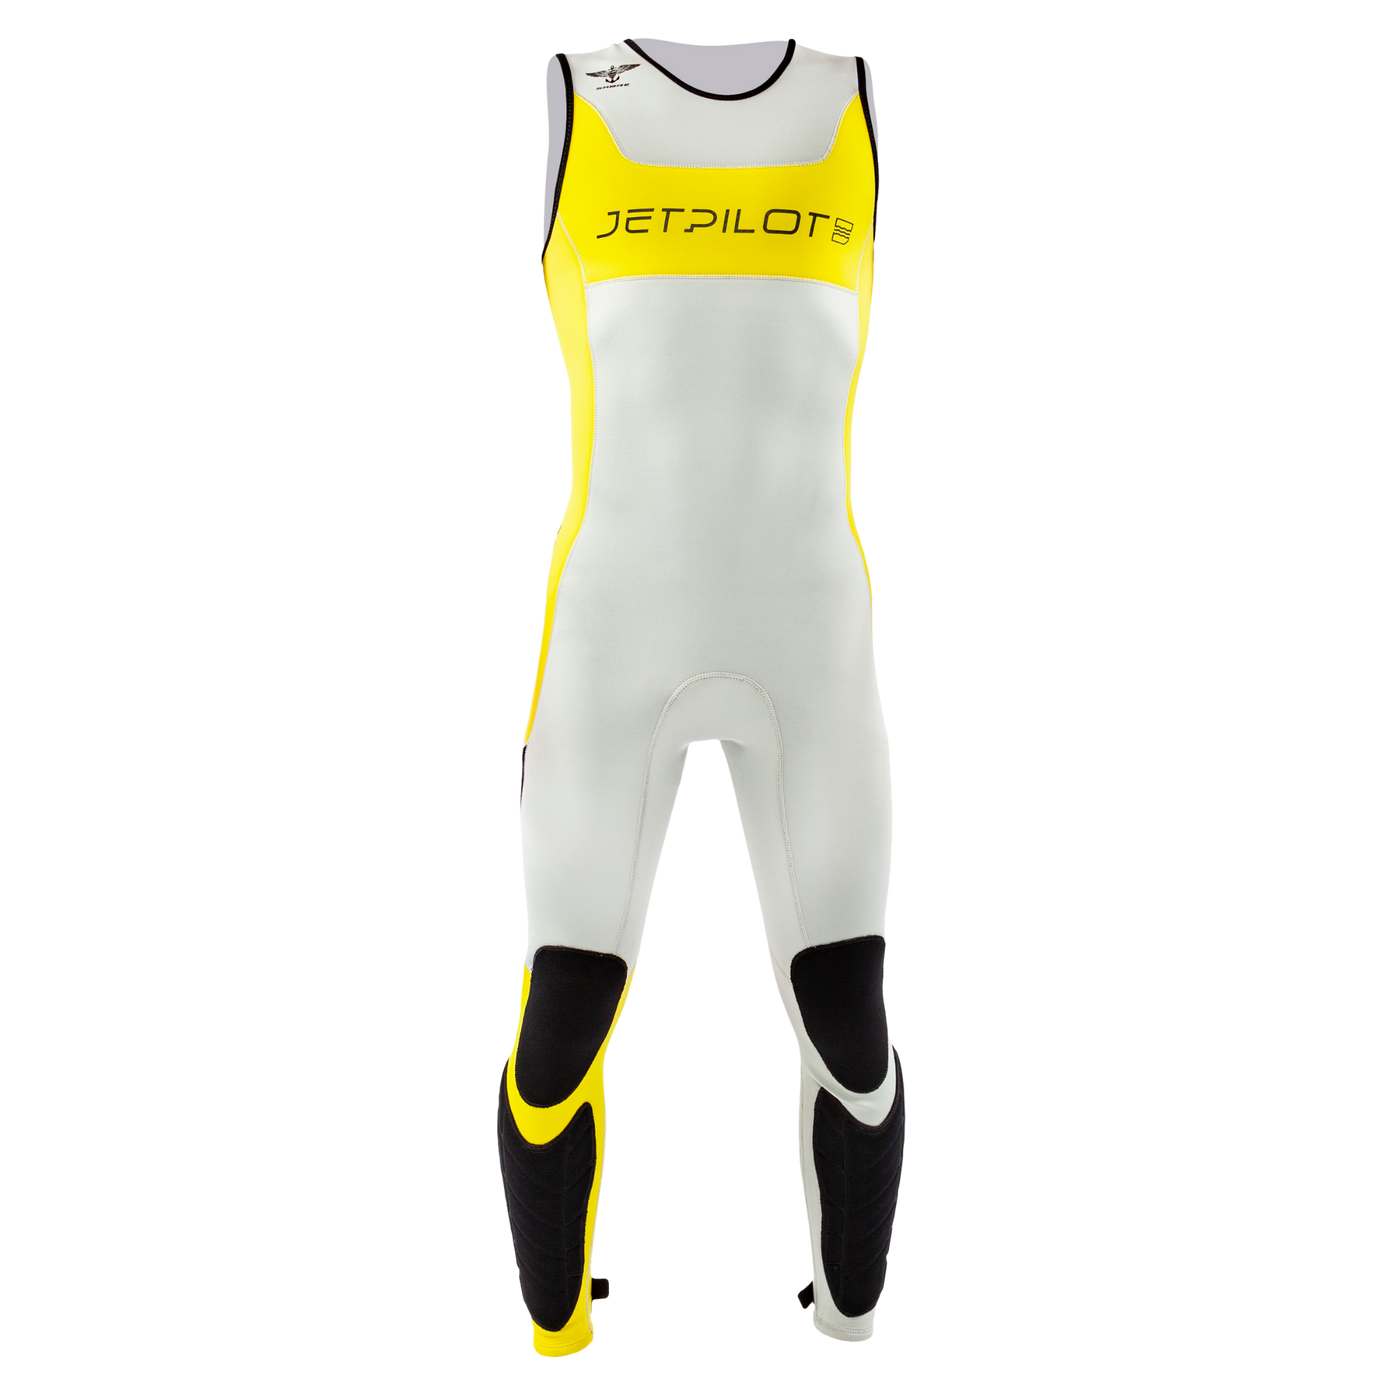 Front view of the Jetpilot F-86 Sabre John wetsuit Silver Yellow colorway.